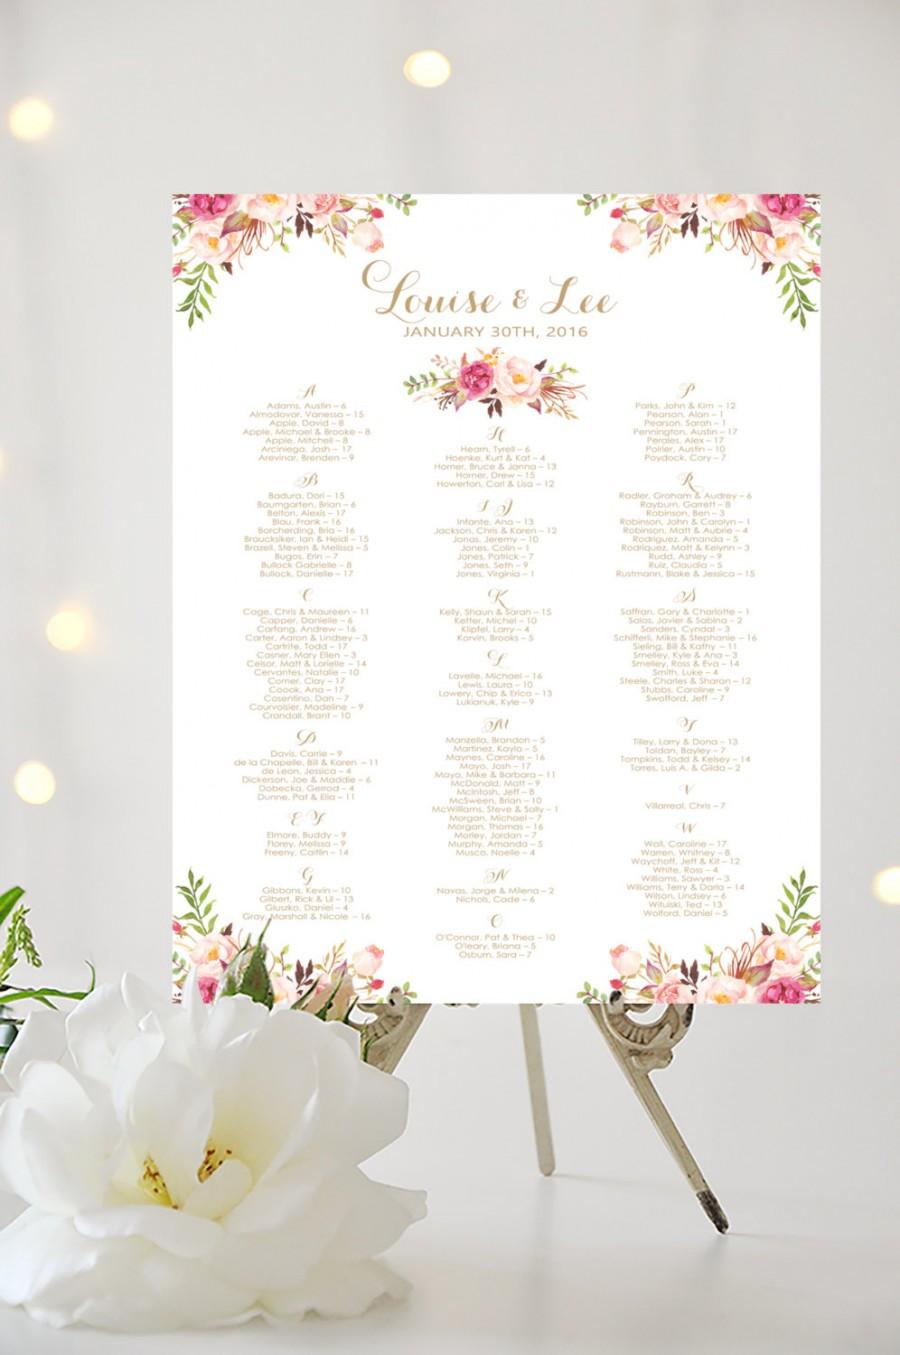 How To List Names On Wedding Seating Chart